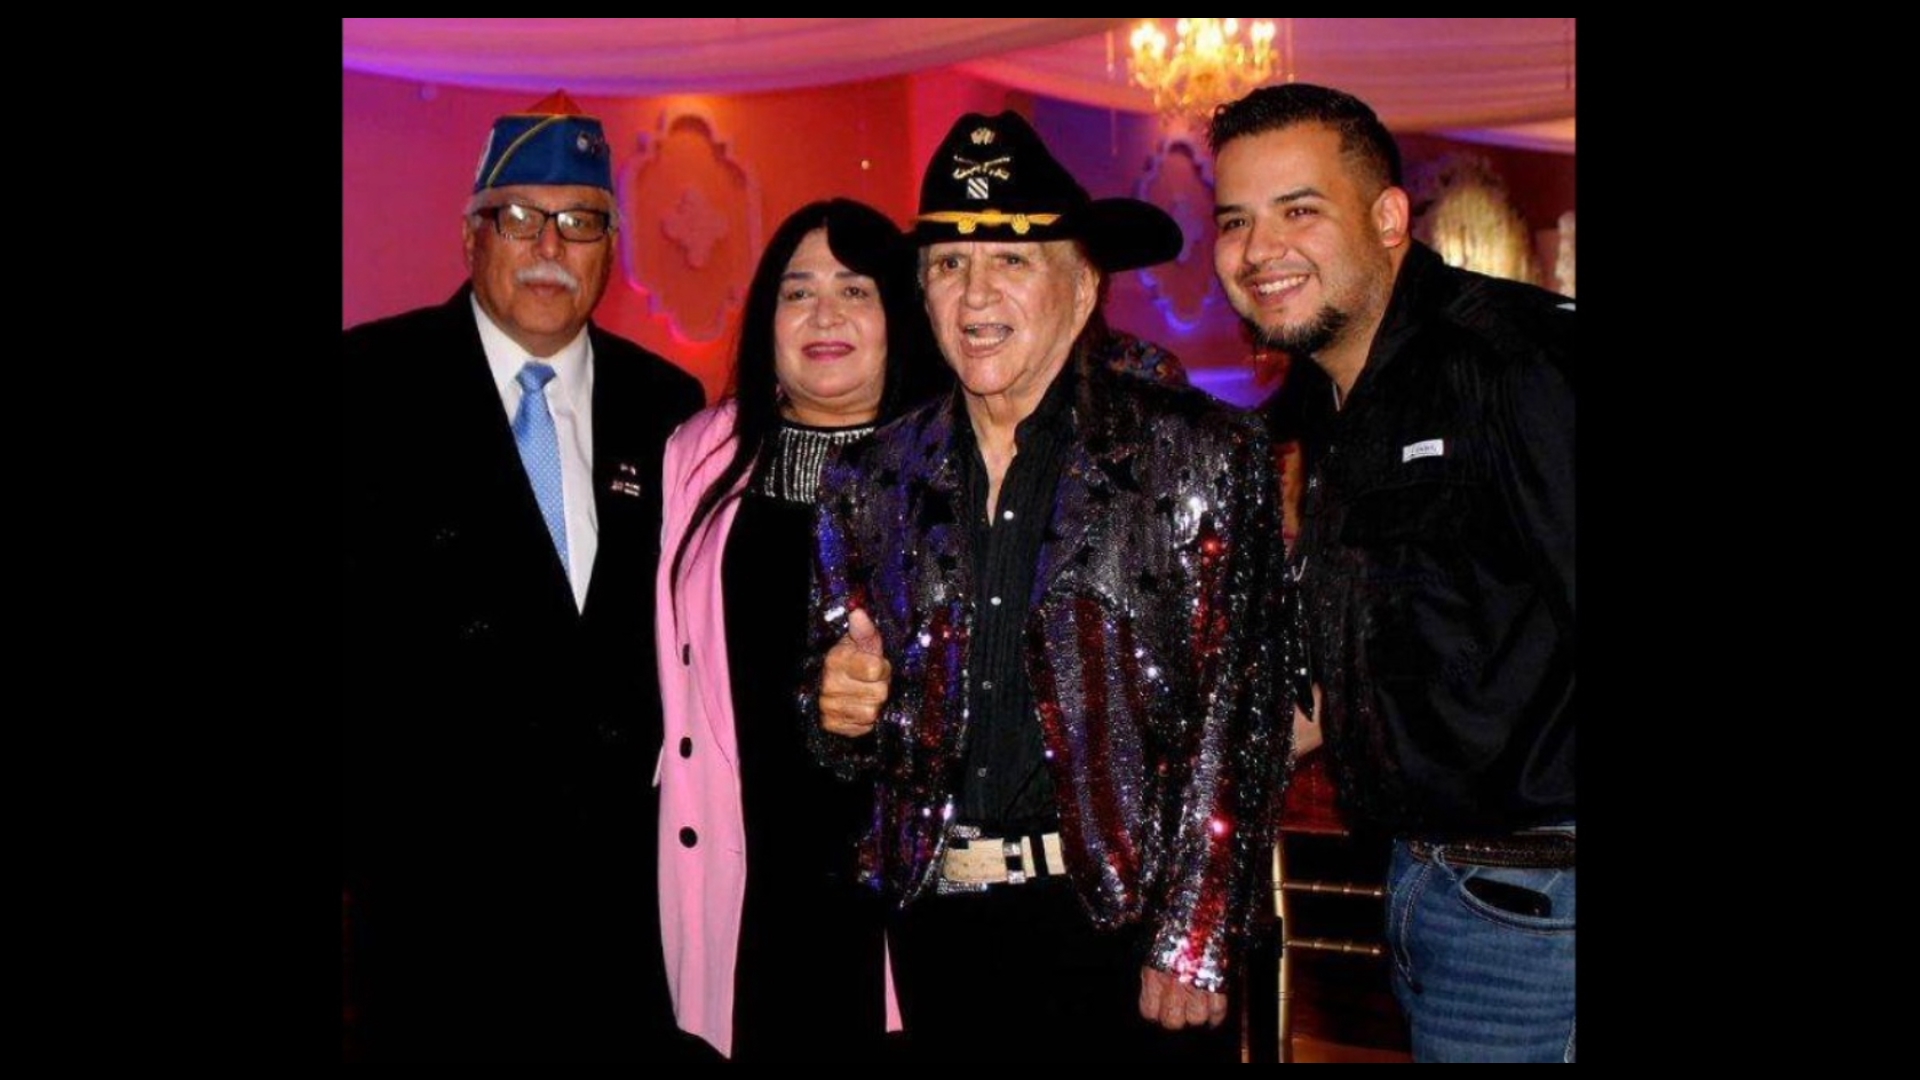 The Robstown native was a pioneer on the Tejano music scene, as well as involved in civic and veterans causes.